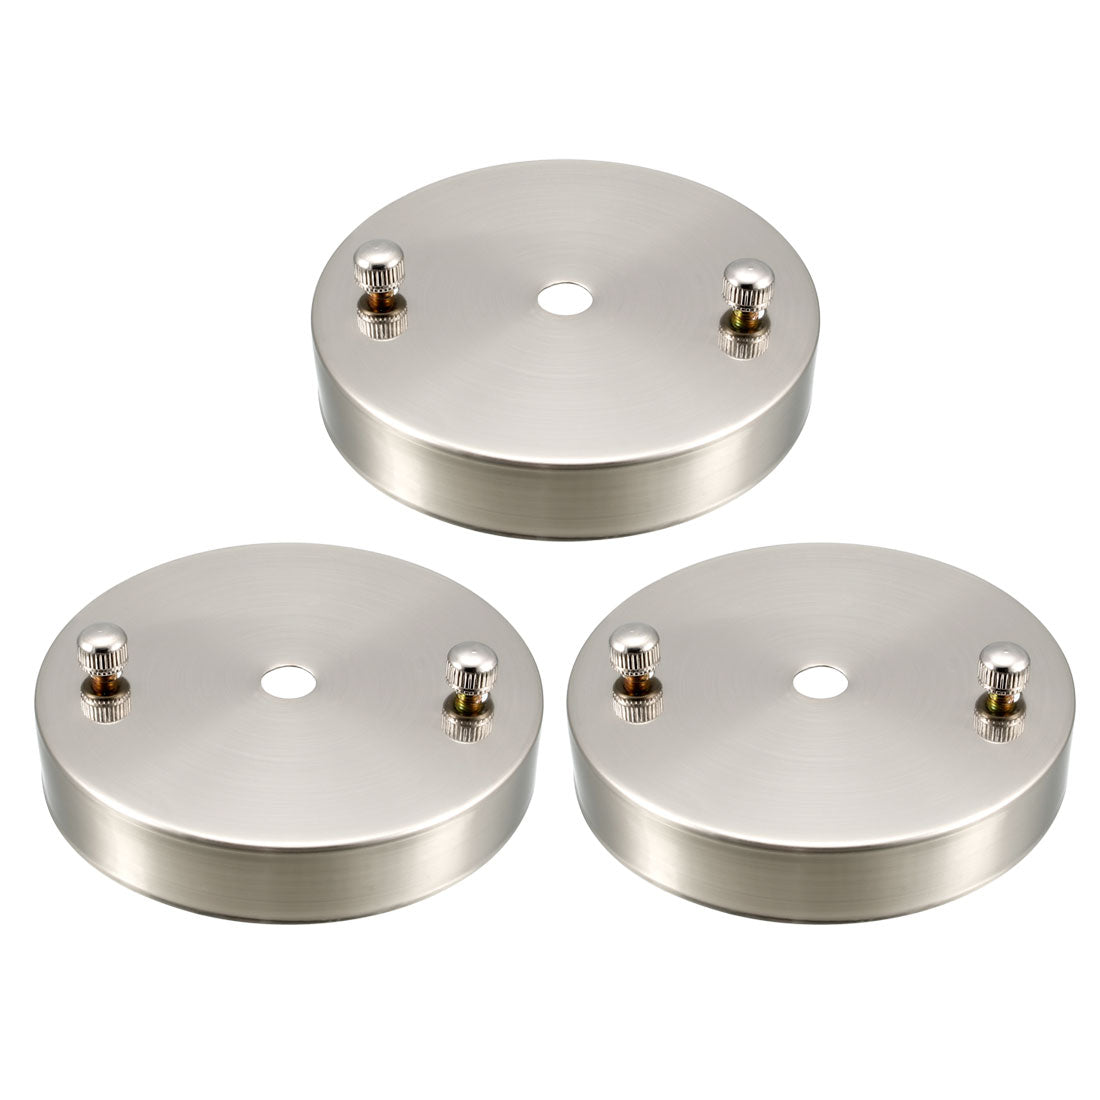 uxcell Uxcell Retro Ceiling Light Plate Pointed Round Base Chassis Disc Pendant Accessories 97mmx20mm Nickel w Screw 3pcs